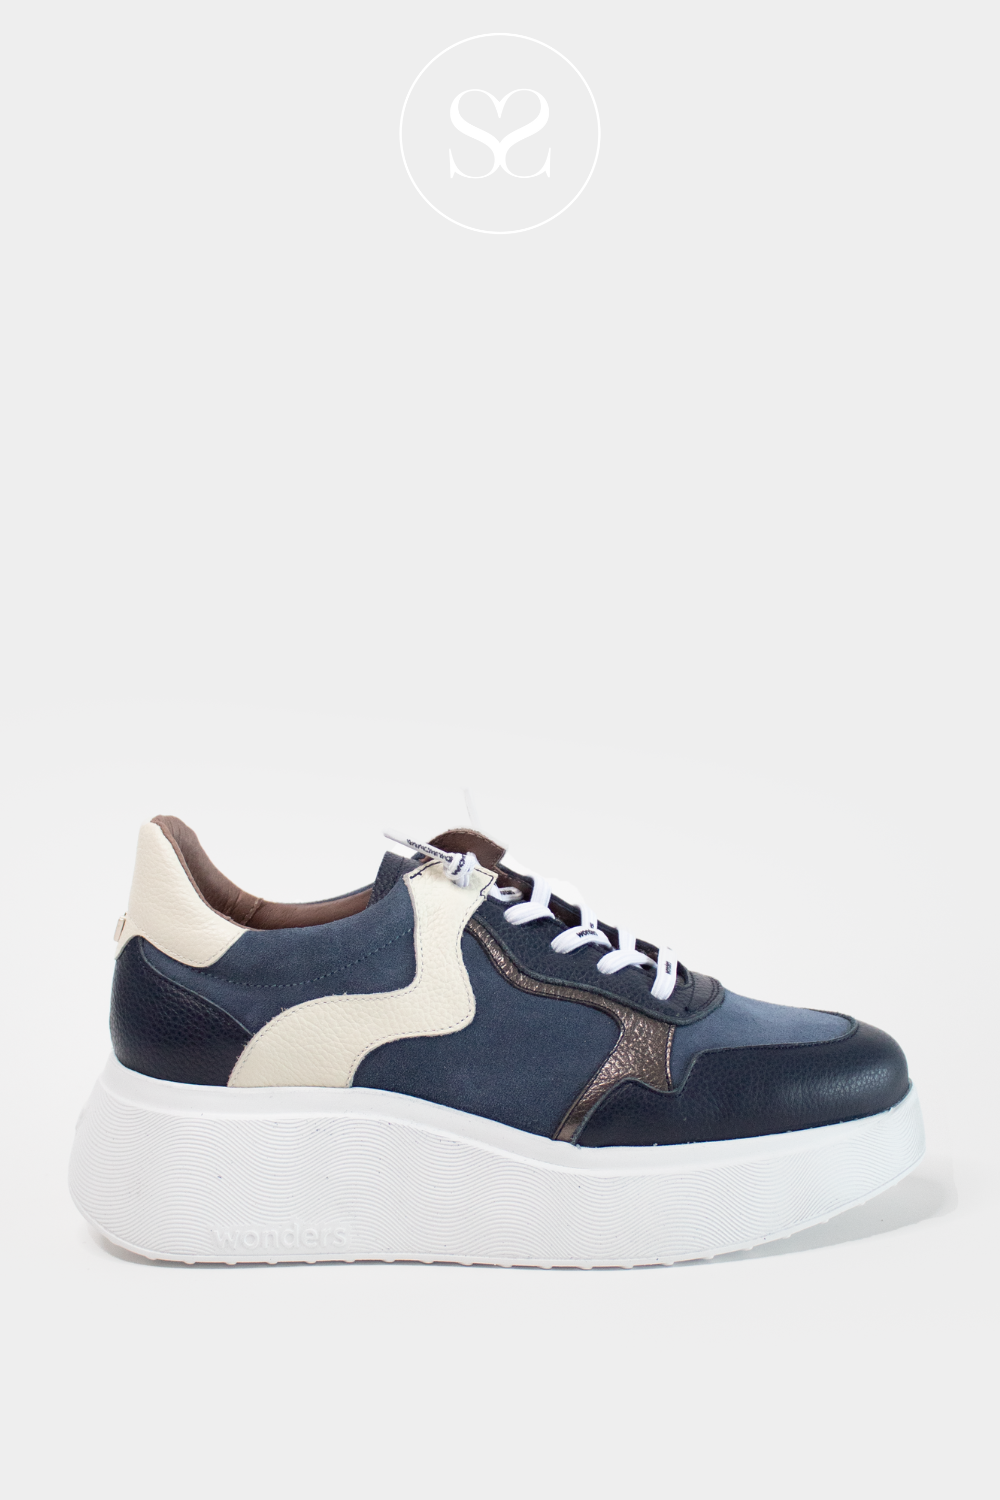 WONDERS A-3611 NAVY/CREAM LEATHER WEDGE TRAINERS